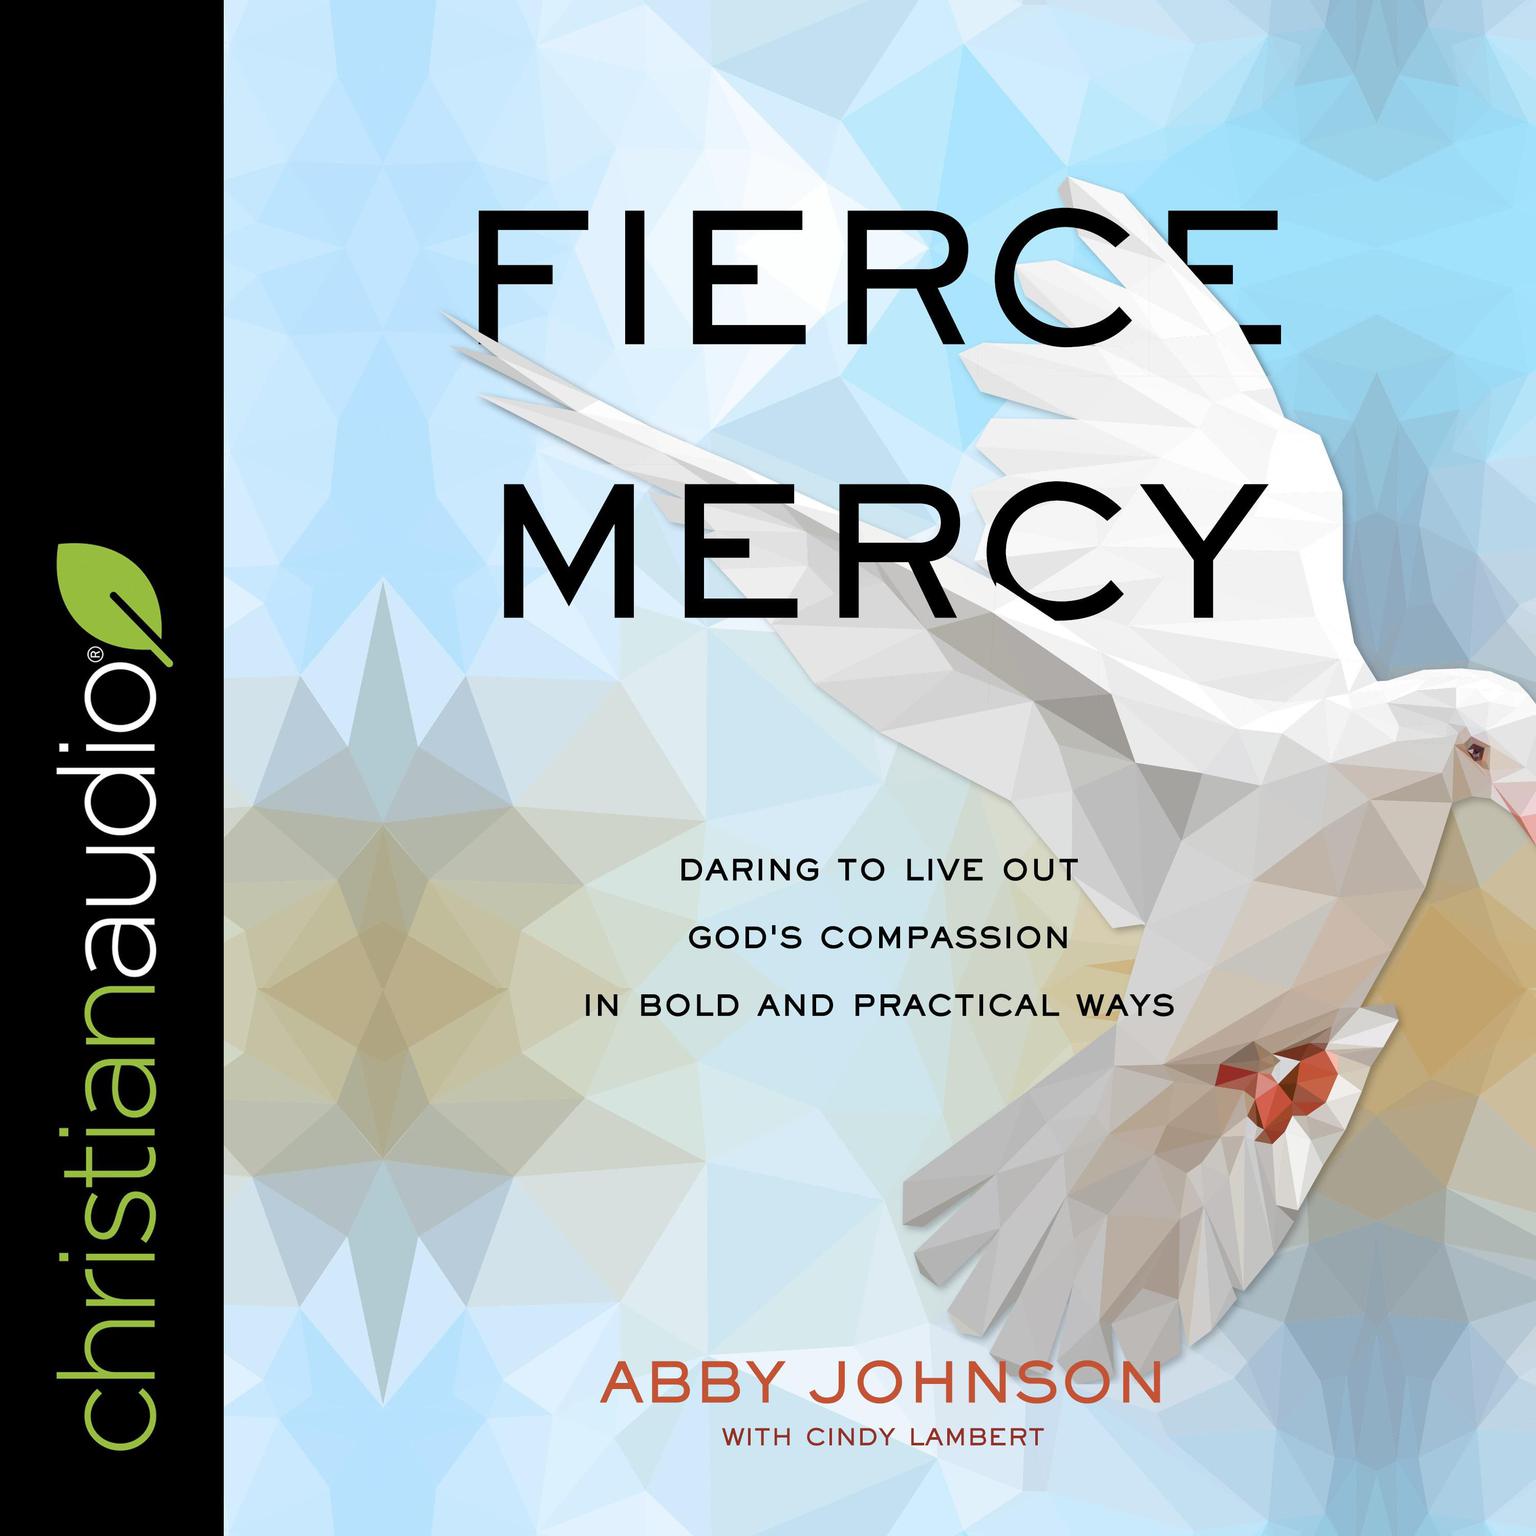 Fierce Mercy: Daring to Live Out God’s Compassion in Bold and Practical Ways Audiobook, by Abby Johnson